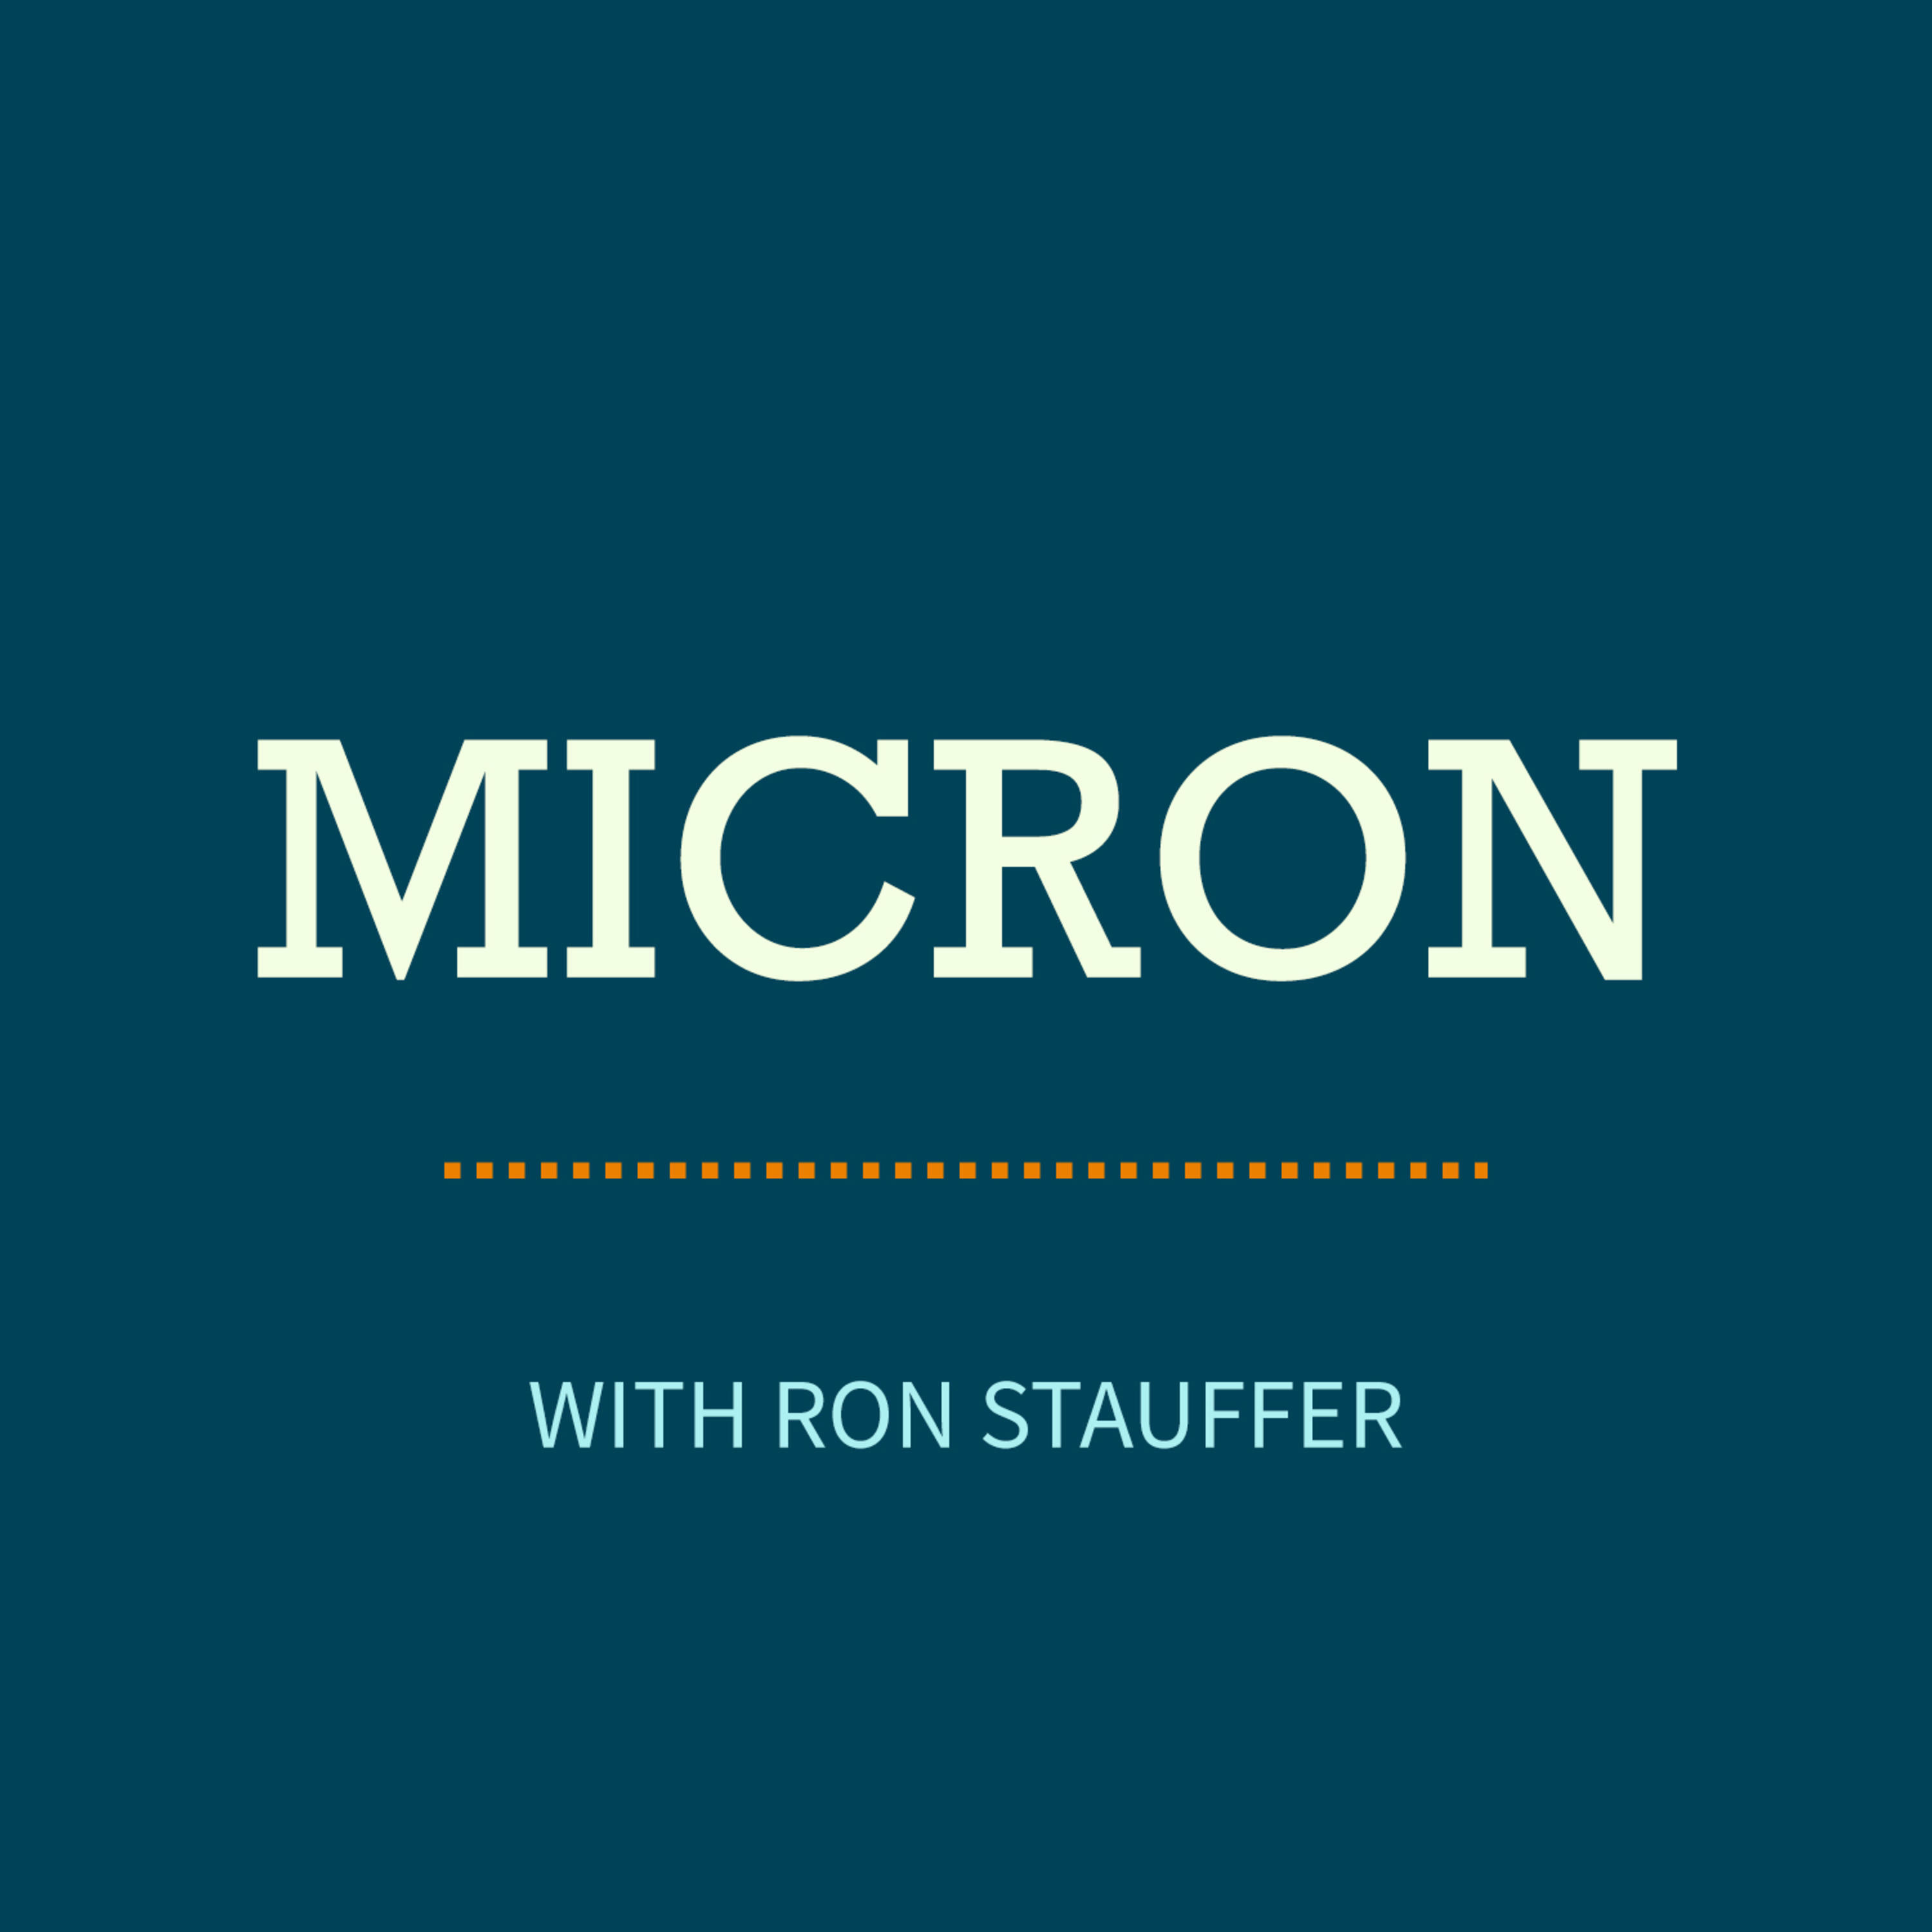 Podcast Trailer: Introducing Micron